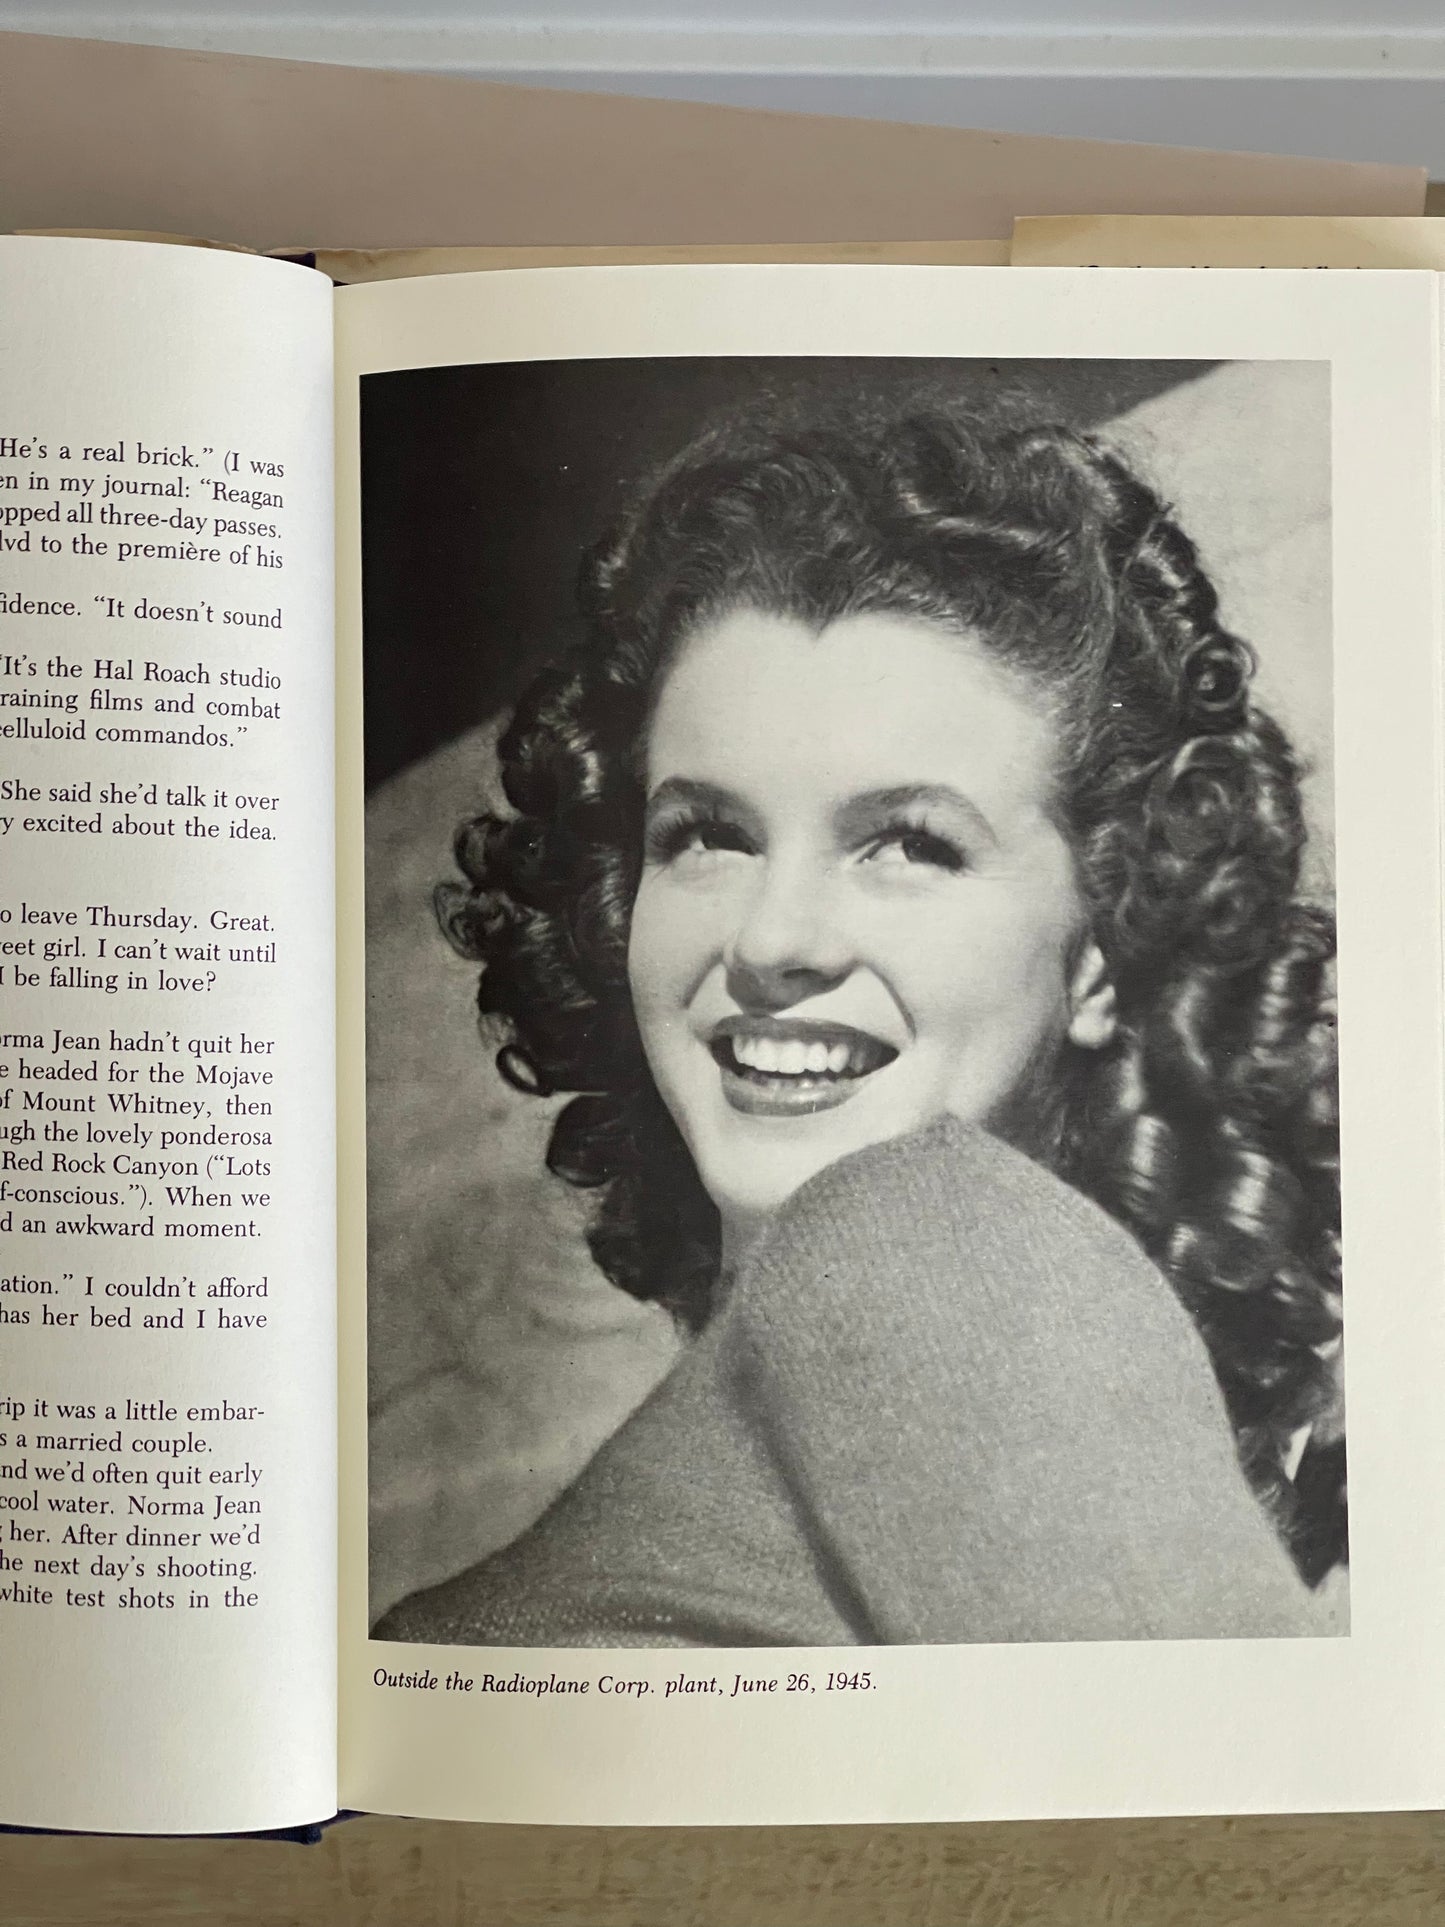 vintage book | finding marilyn: a romance